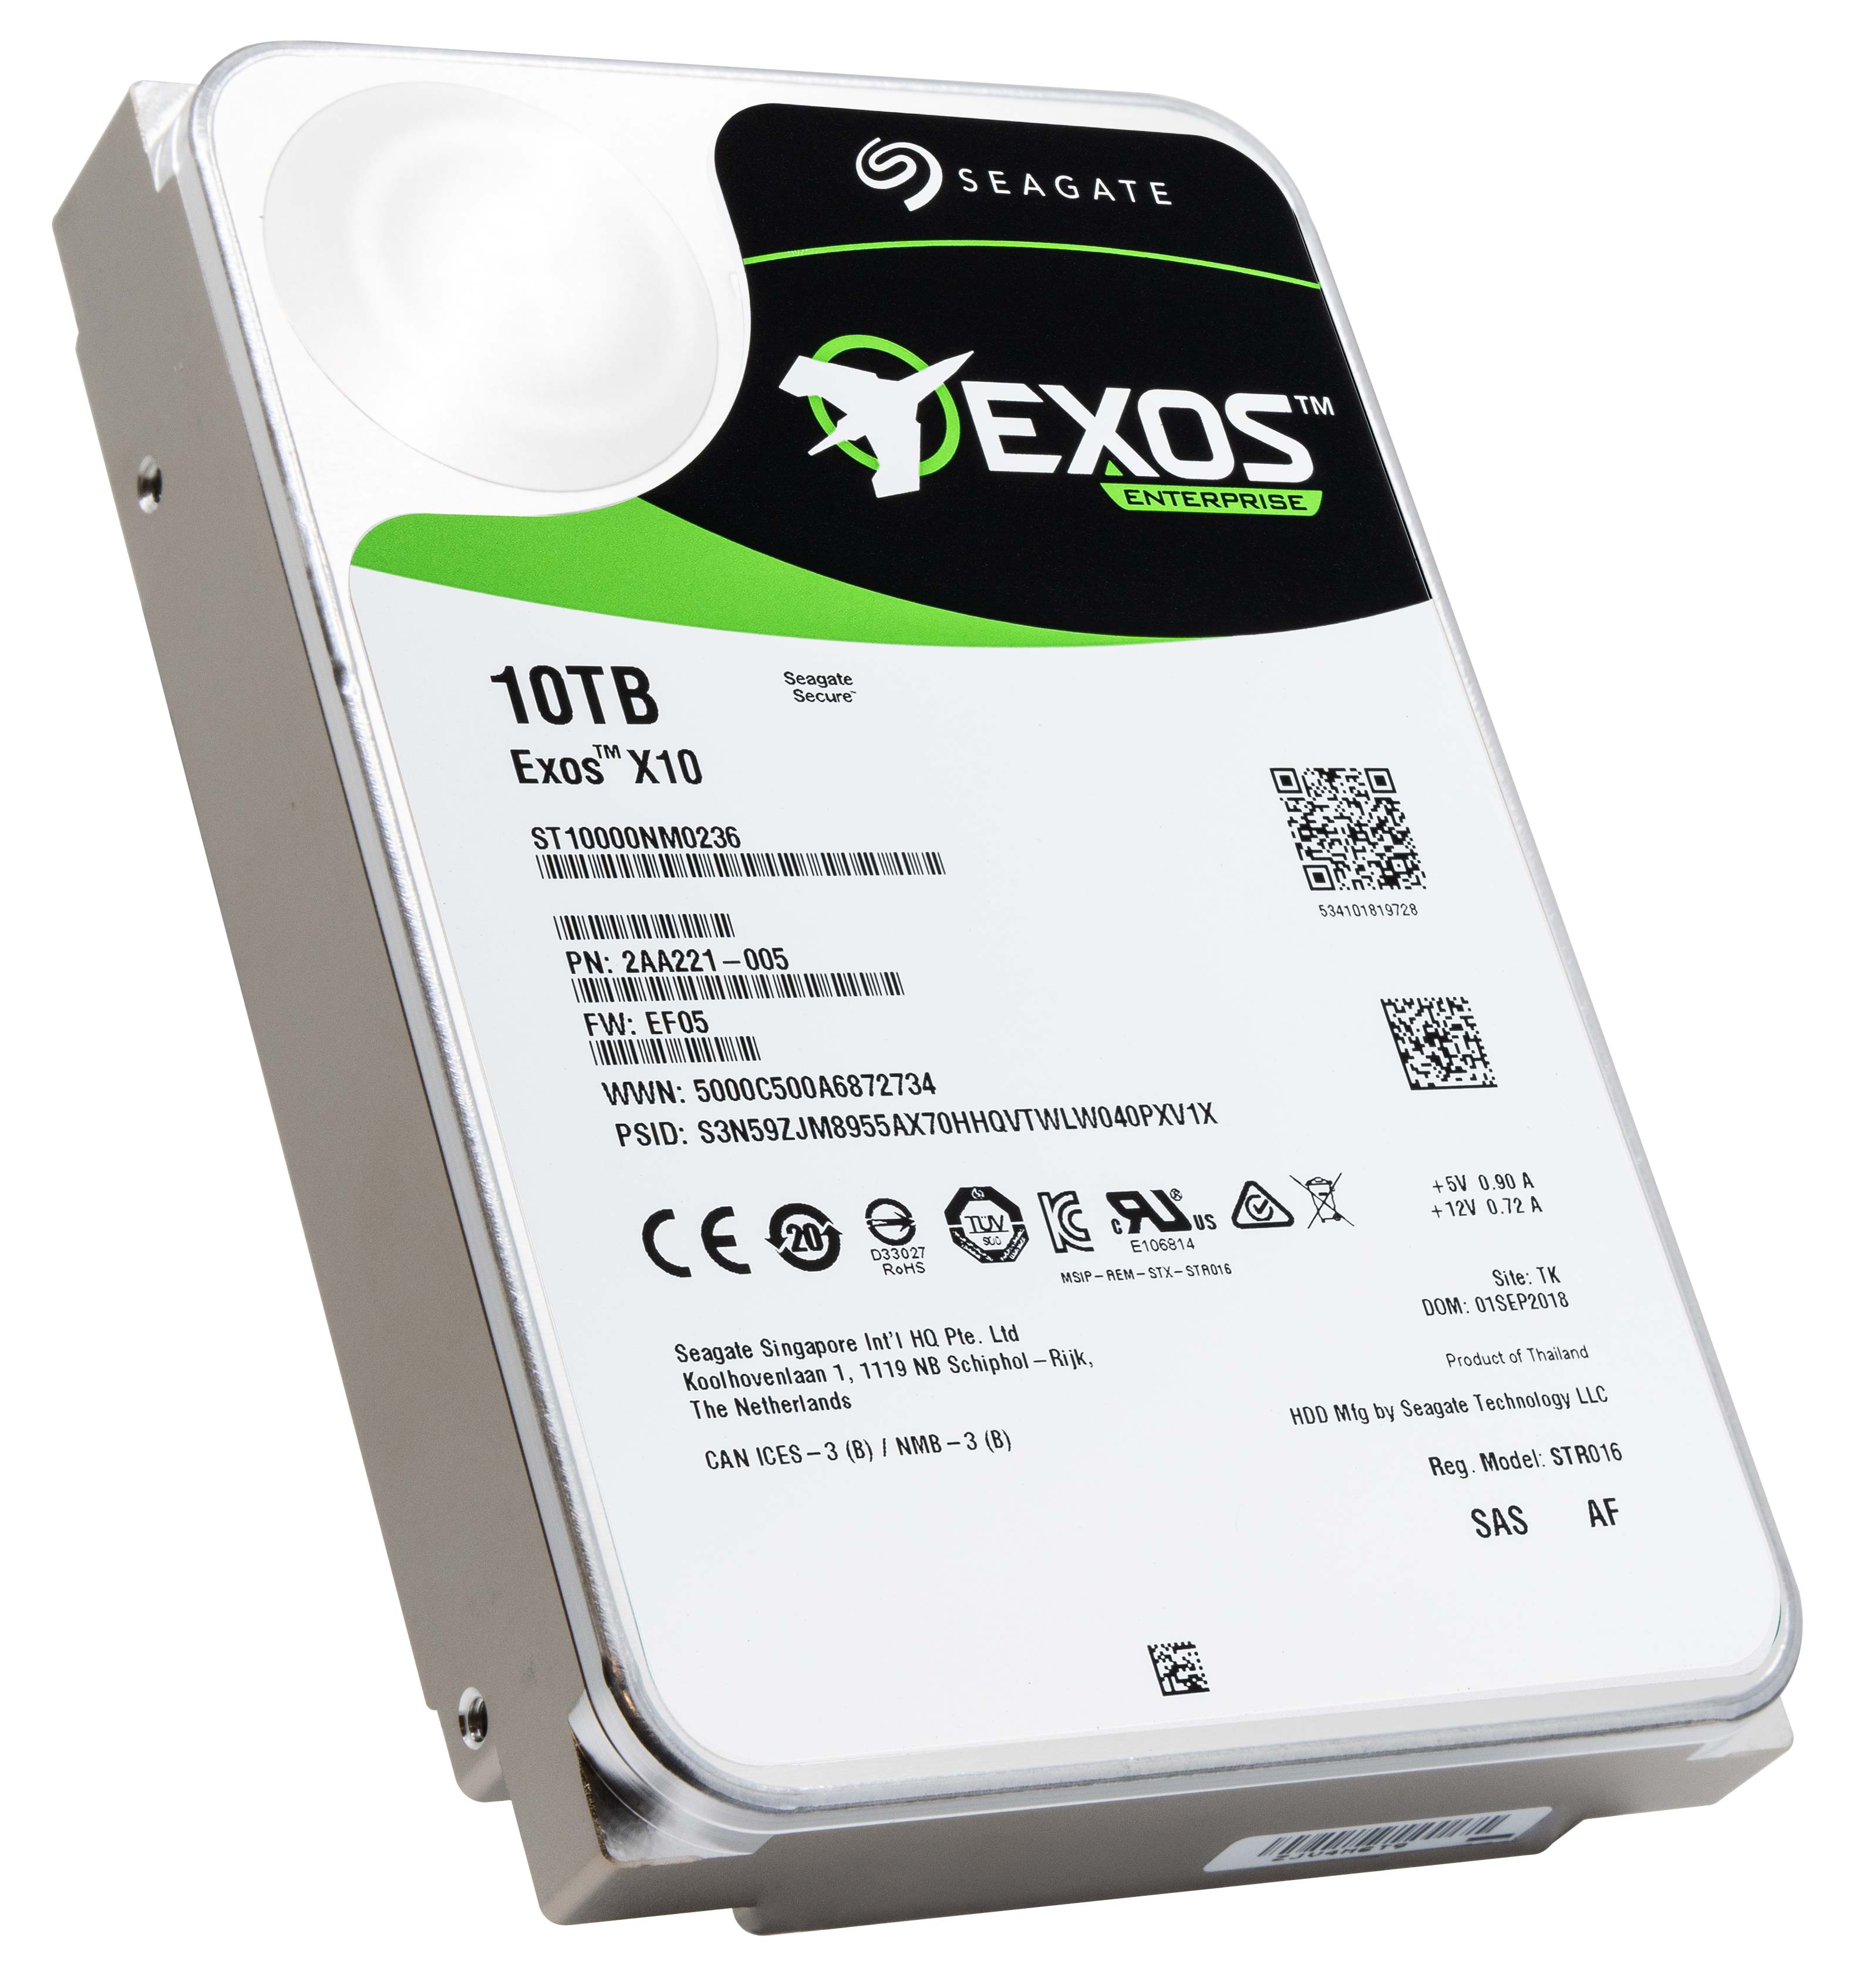 Seagate Exos X10 ST10000NM0236 10TB 7.2K RPM SAS 12Gb/s 512e 256MB 3.5" SED-FIPS Hard Drive - Product Image